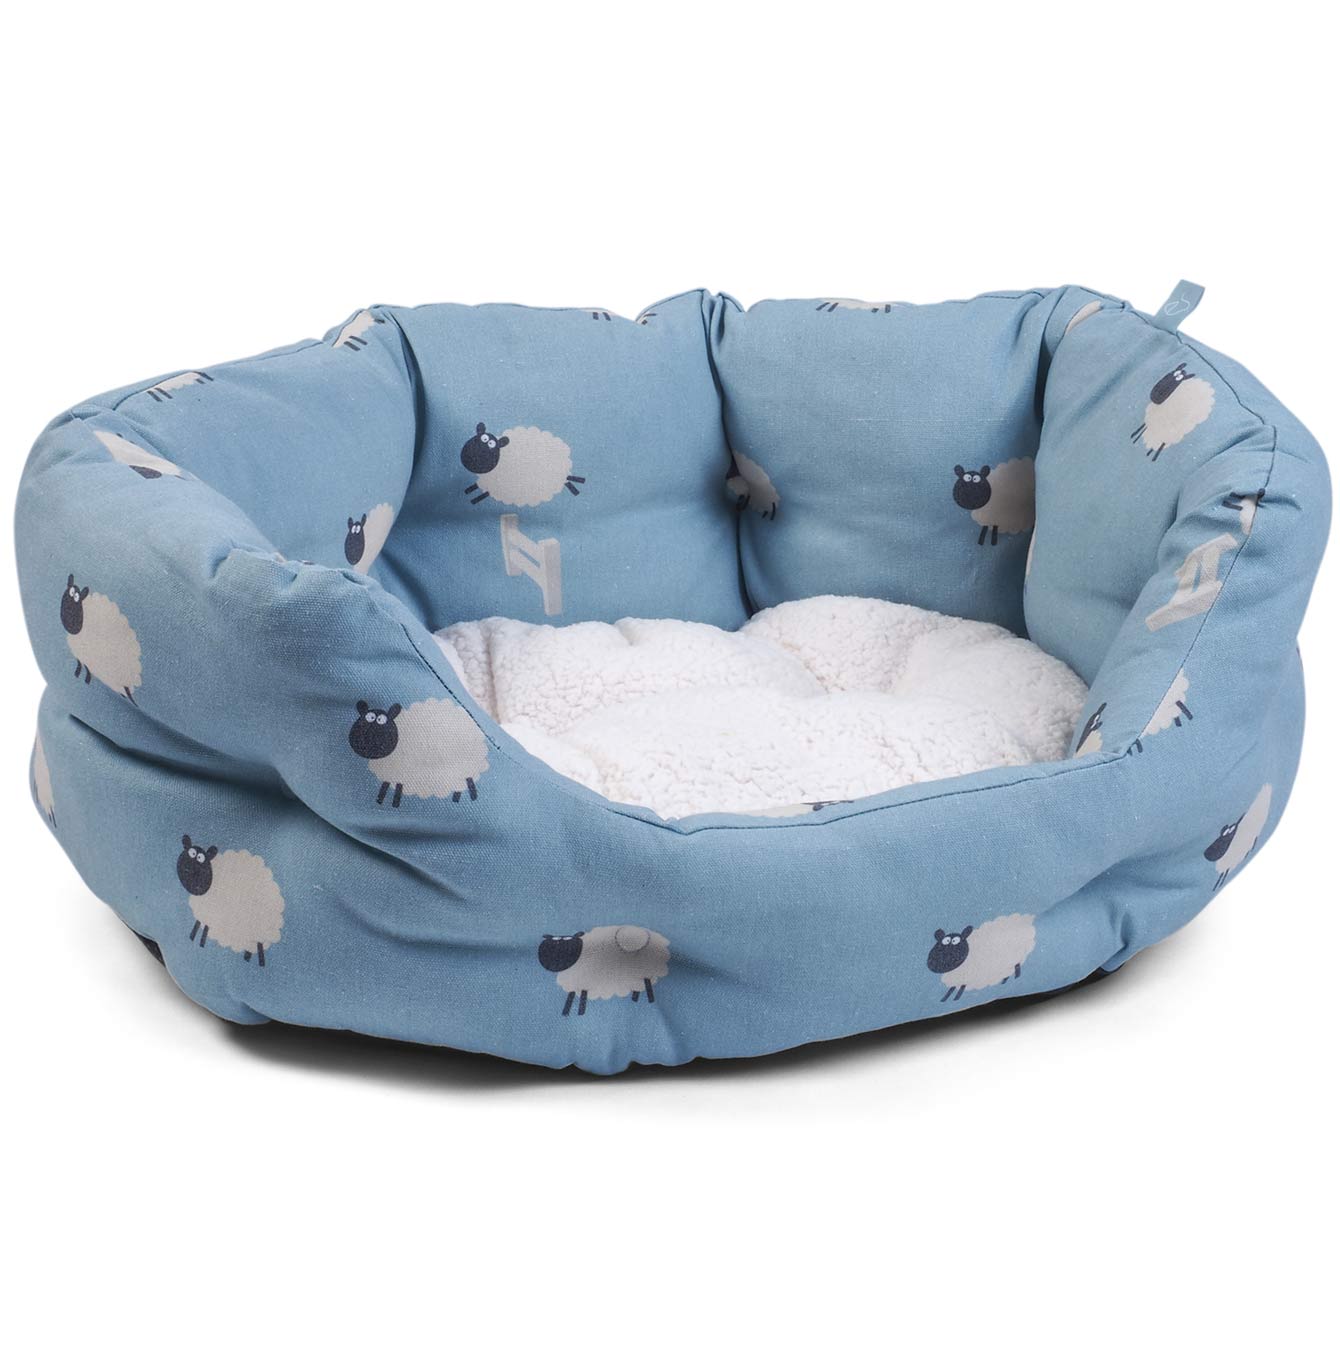 Zoon counting sheep oval bed